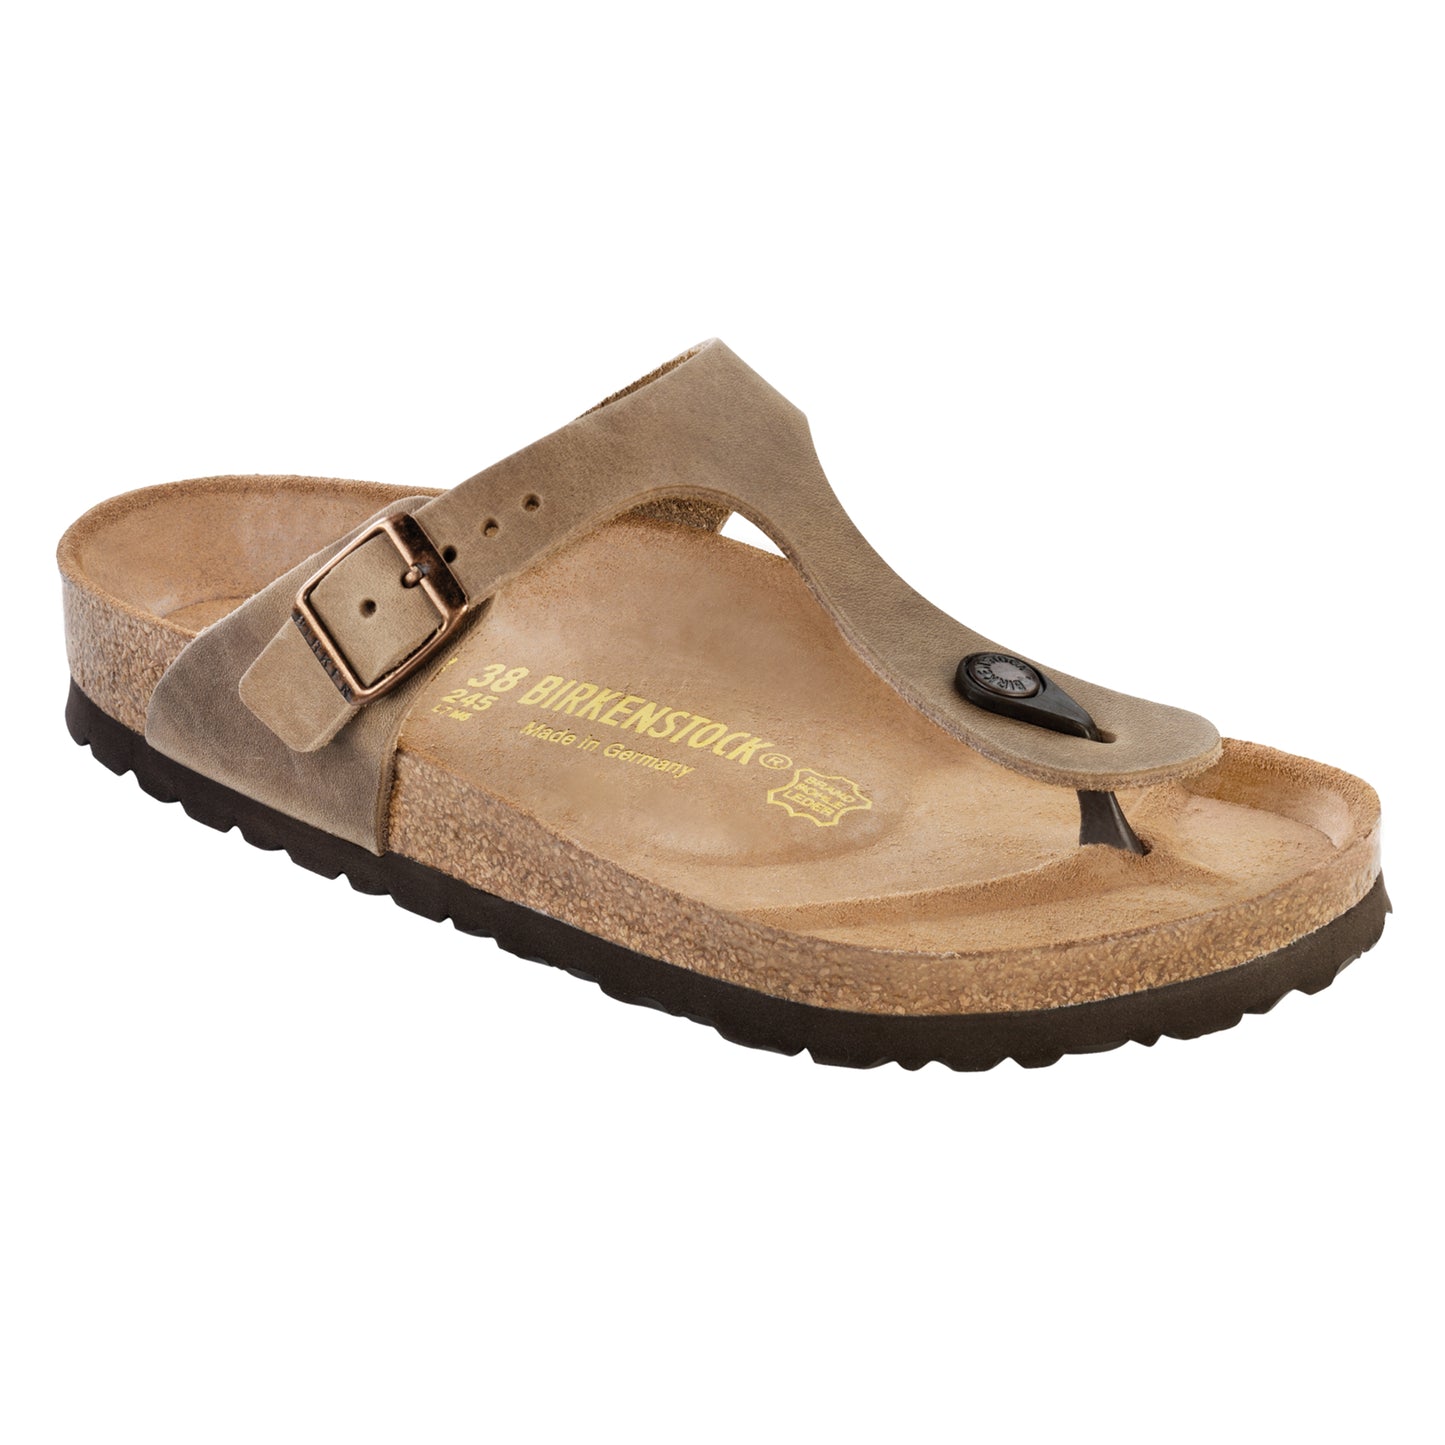 Gizeh Cork Tobacco Brown Oiled Leather Sandal- Regular/Wide